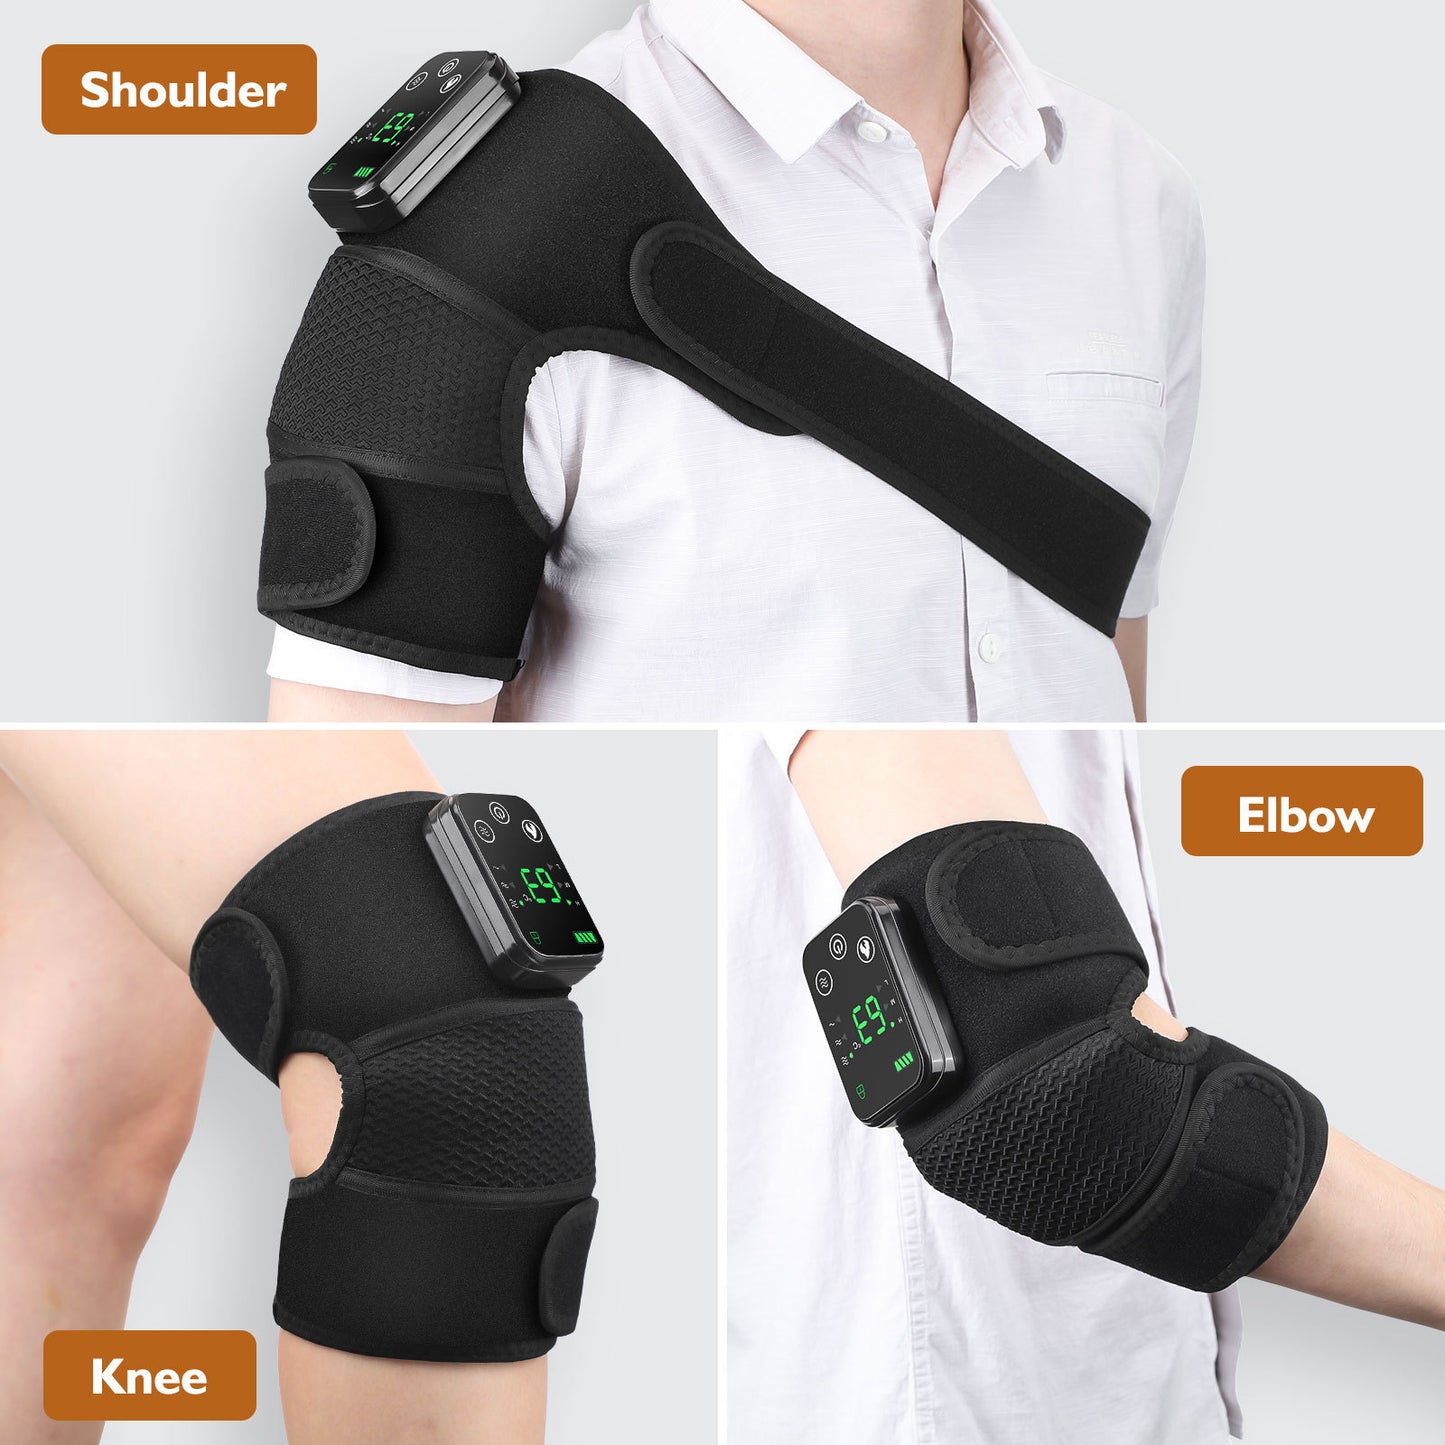 New Knee Pad Button Controlled Vibration Warmth And Hot Compress Massager